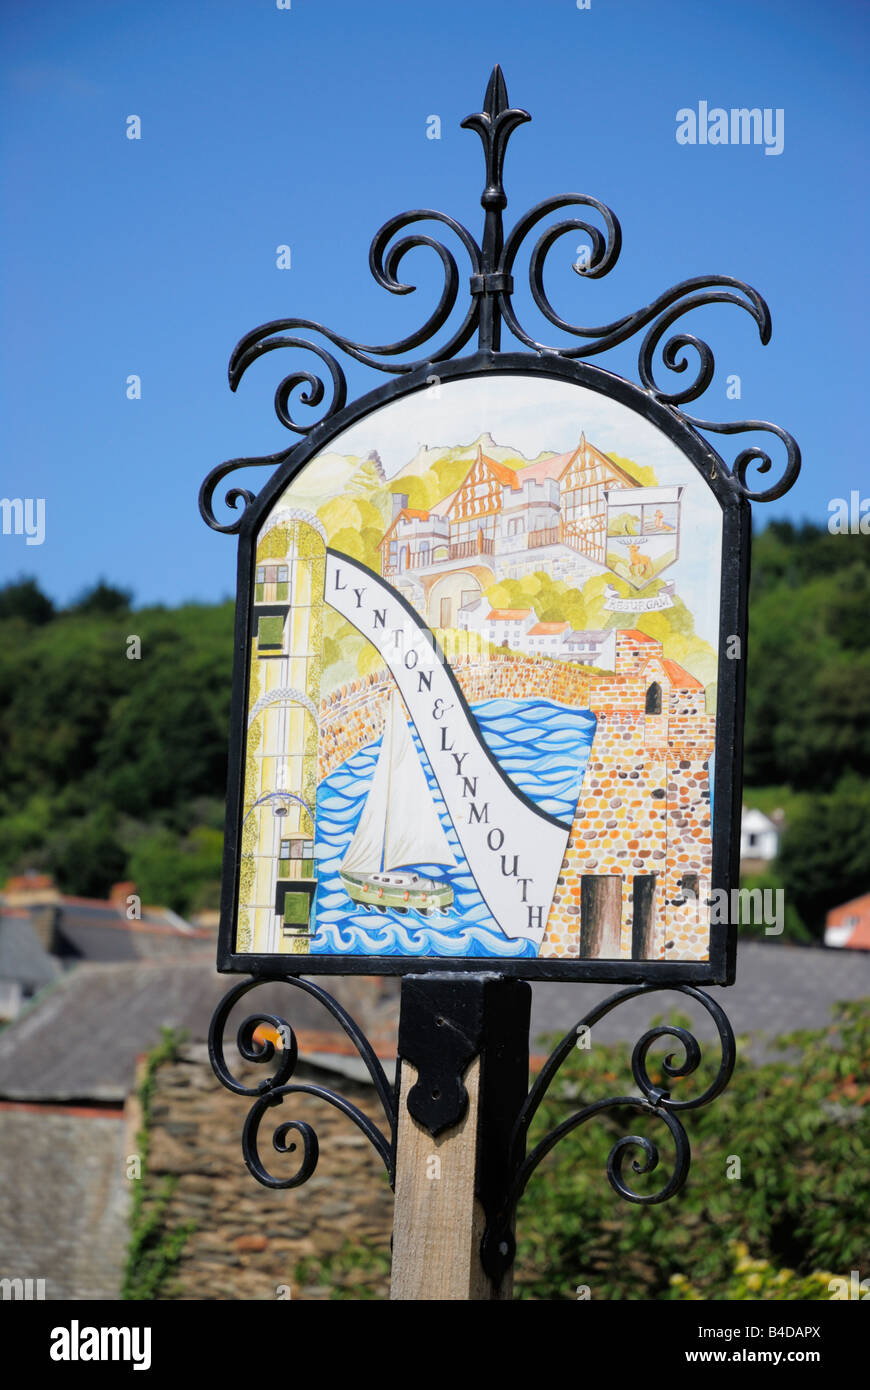 Town sign for Lynton and Lynmouth in North Devon, UK Stock Photo